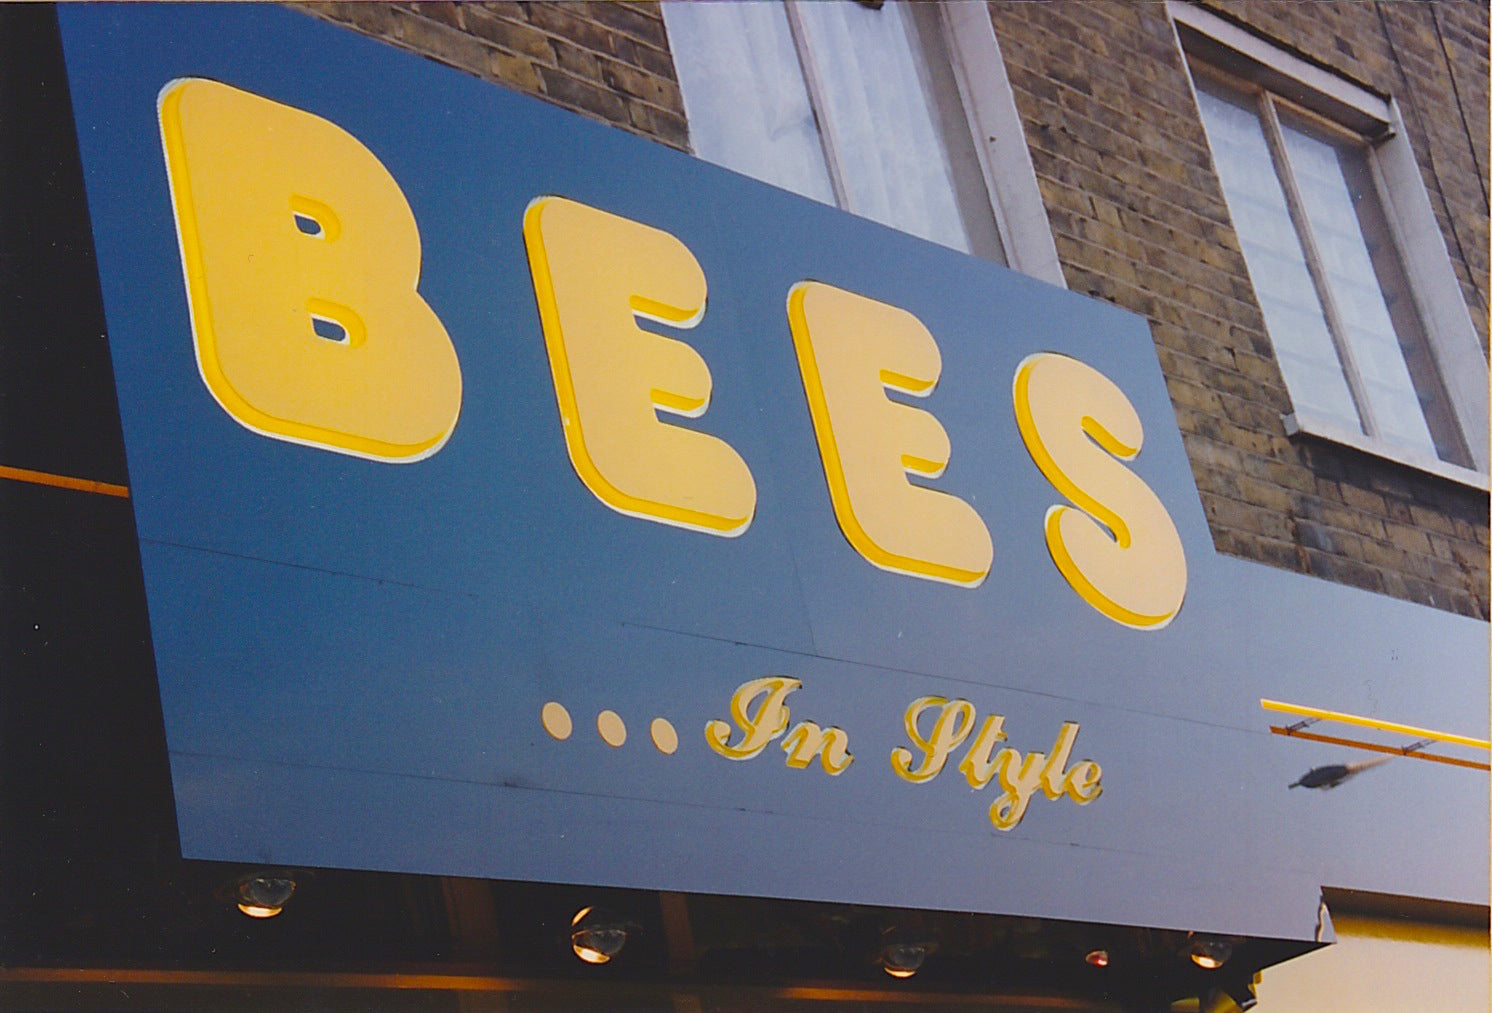 Why we chose the name Bees?